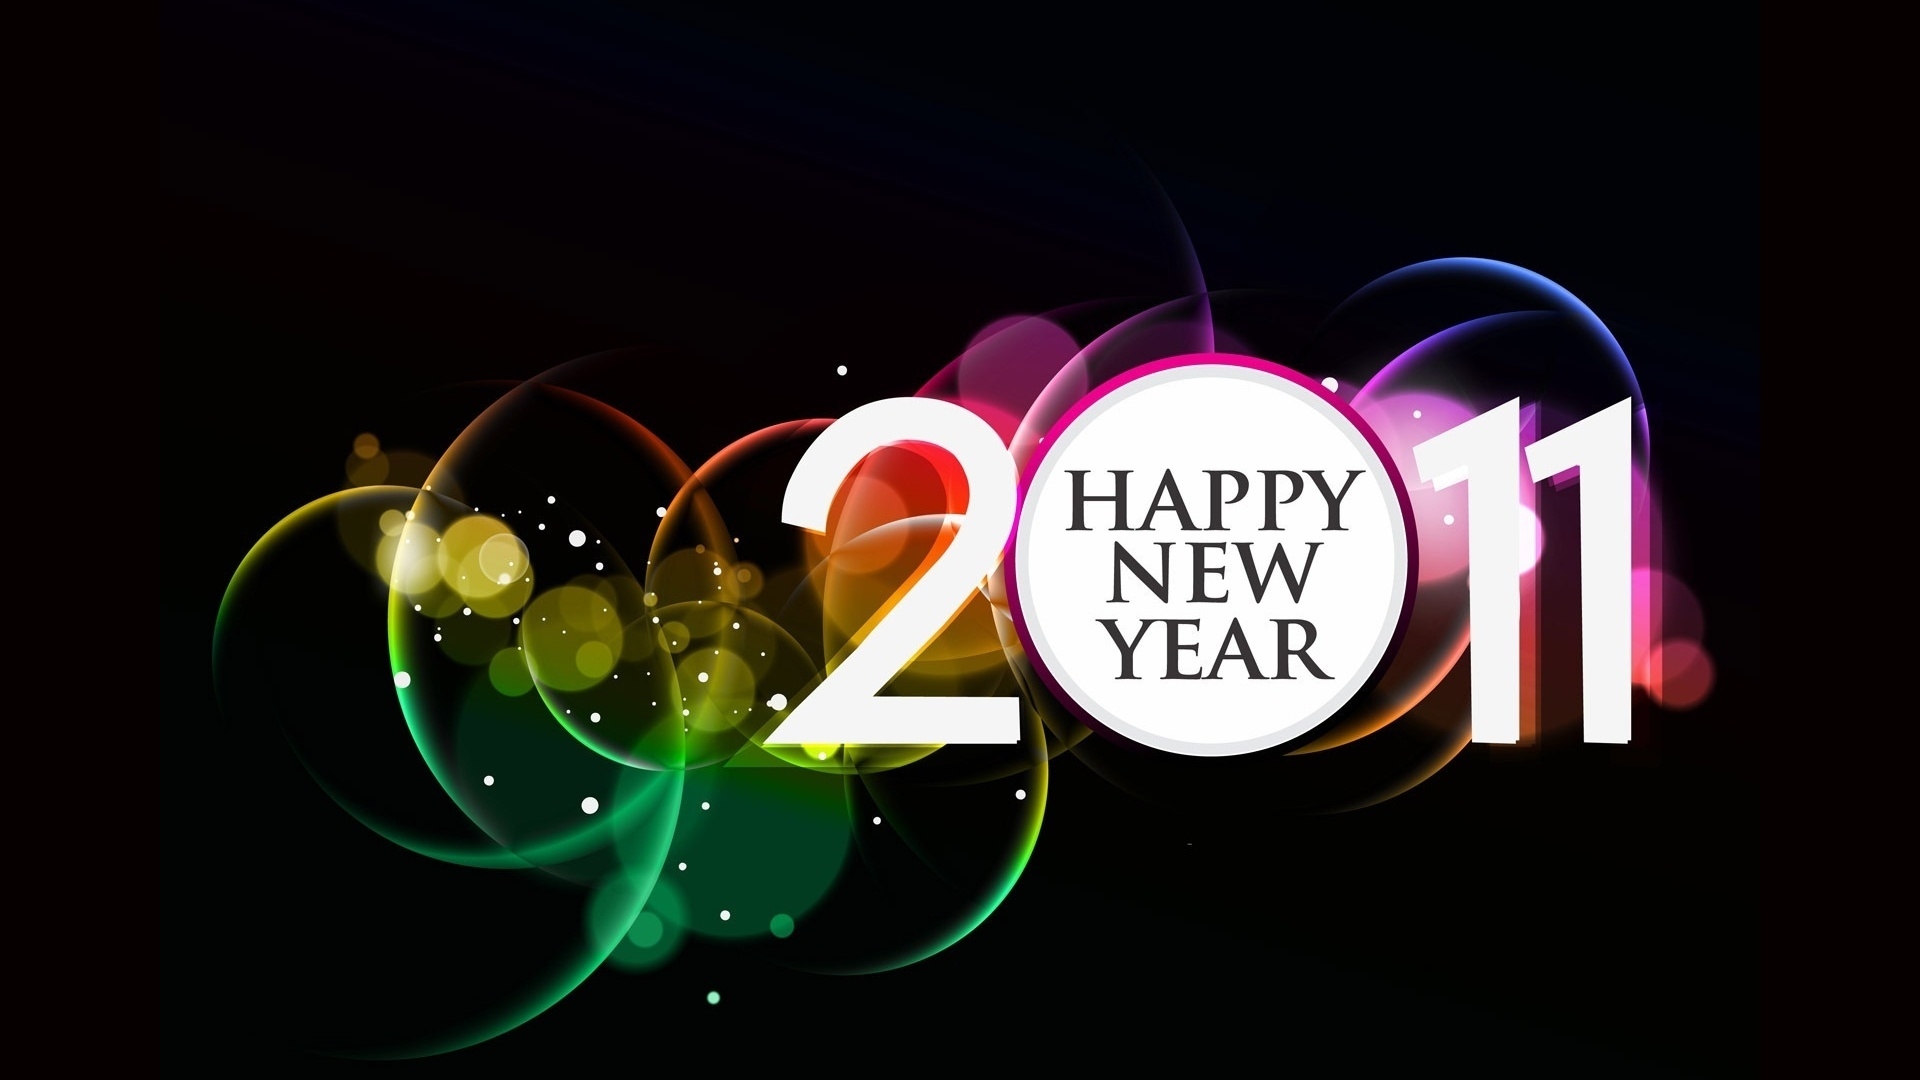 2011 Happy New Year for 1920 x 1080 HDTV 1080p resolution